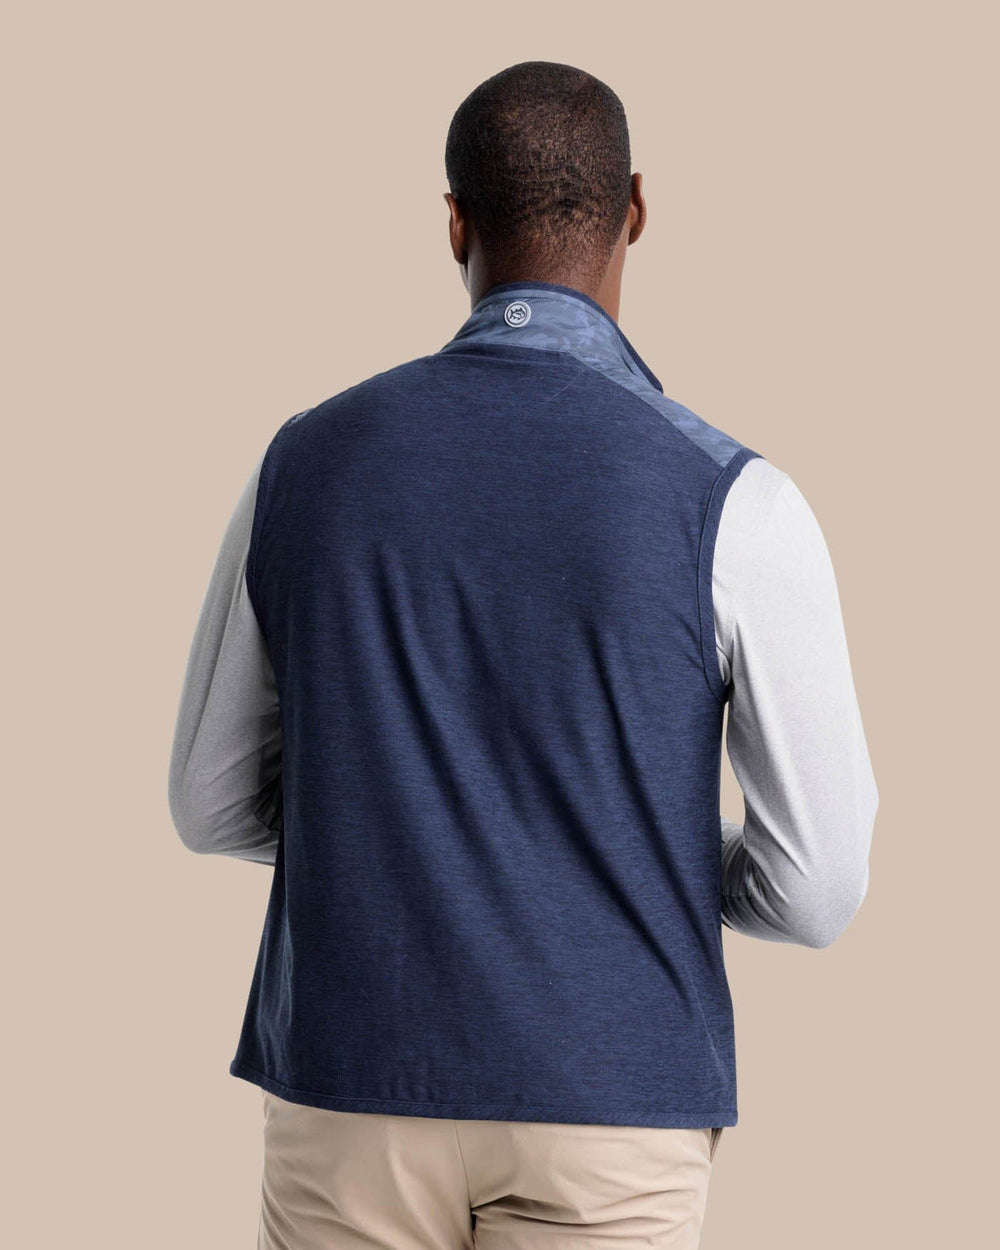 The back view of the Abercorn Camo Performance Vest by Southern Tide - True Navy